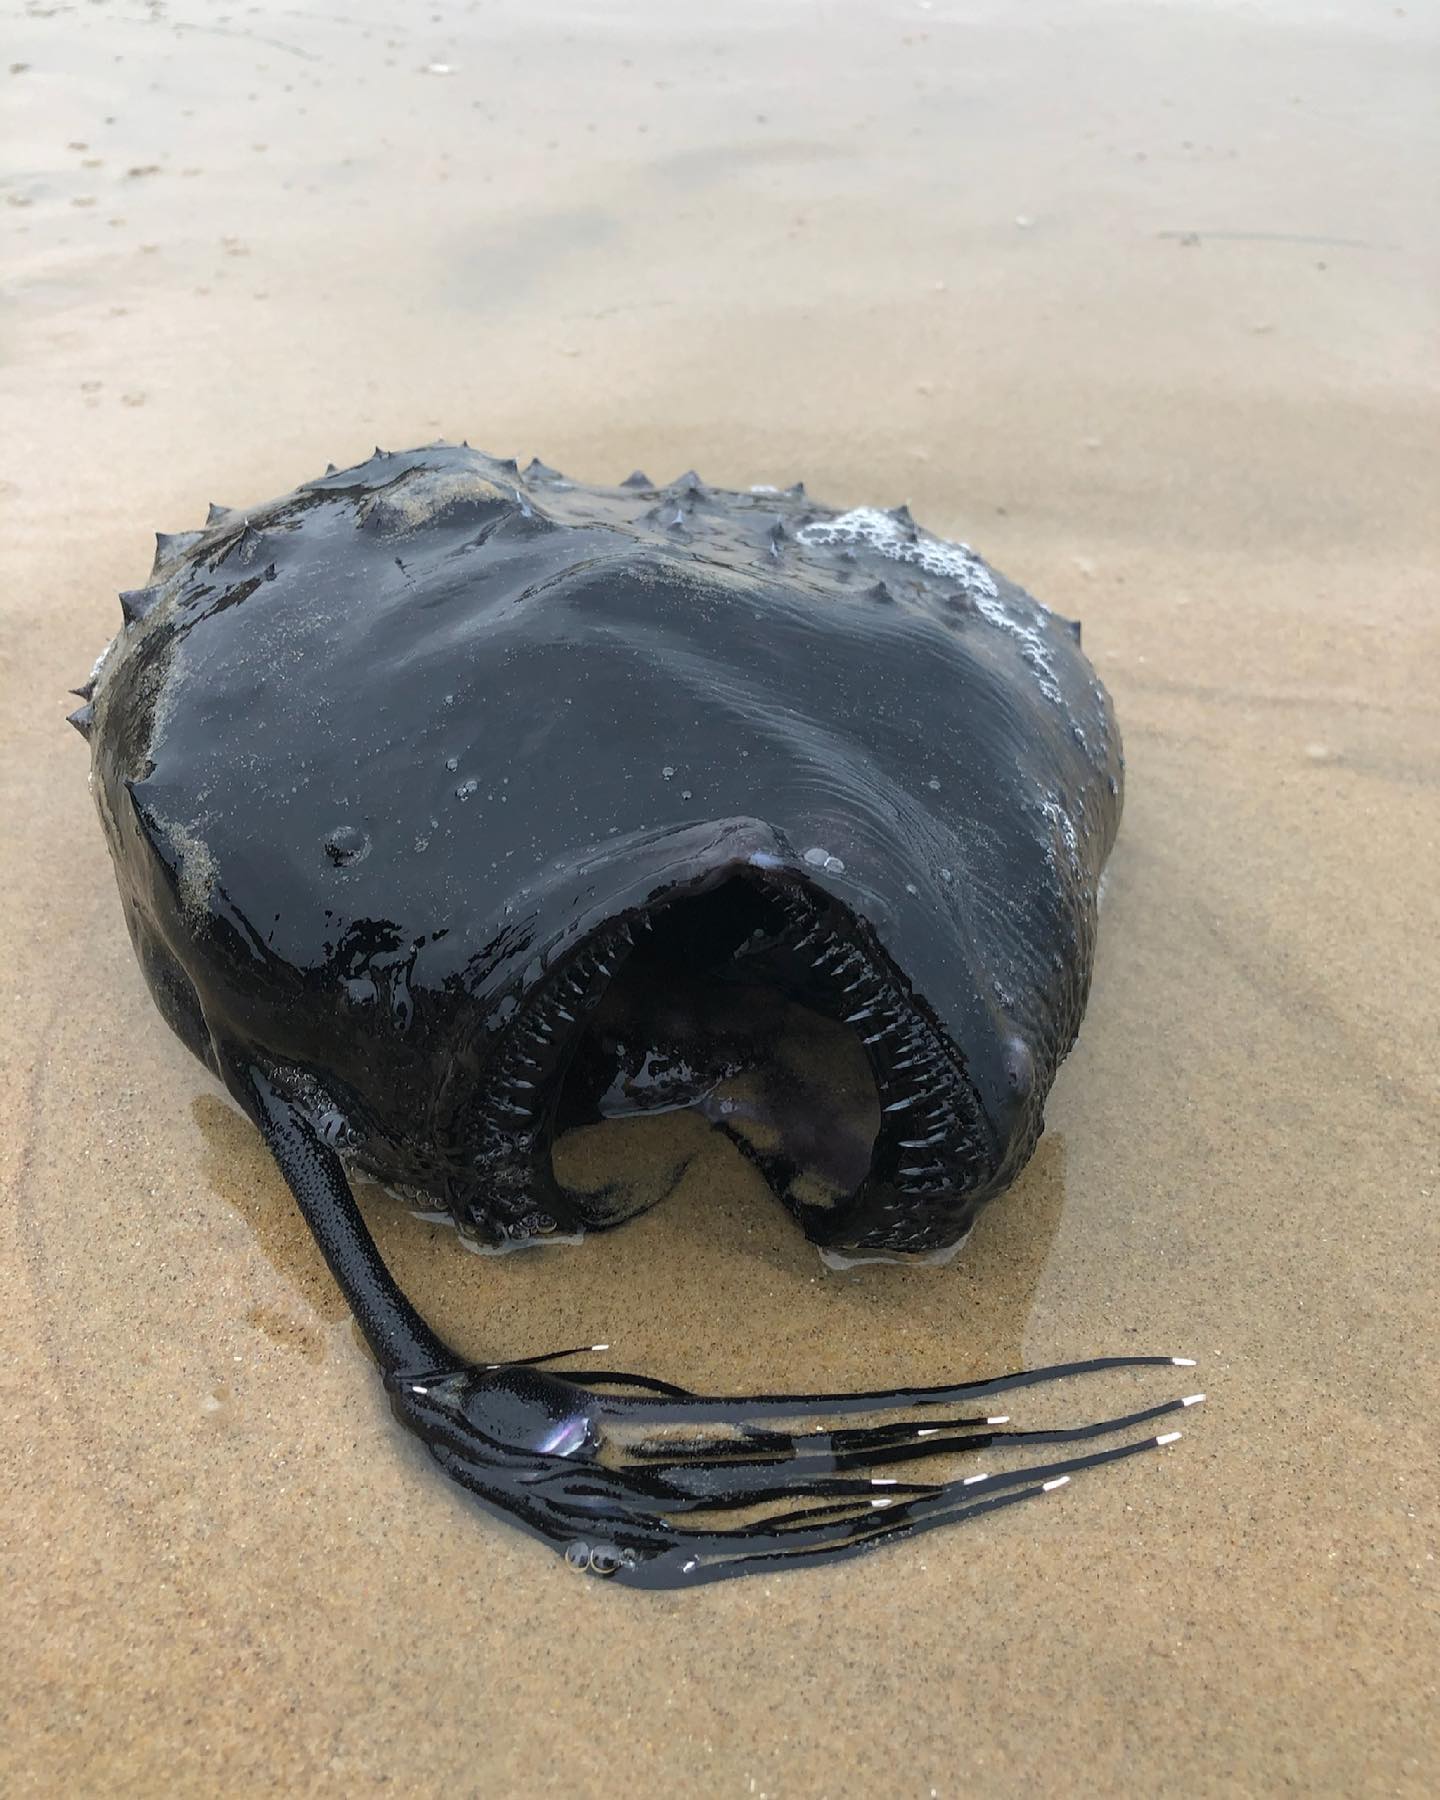 Rarely Seen Deep Sea Creature Washes Up Ashore And It Looks Like An Emo